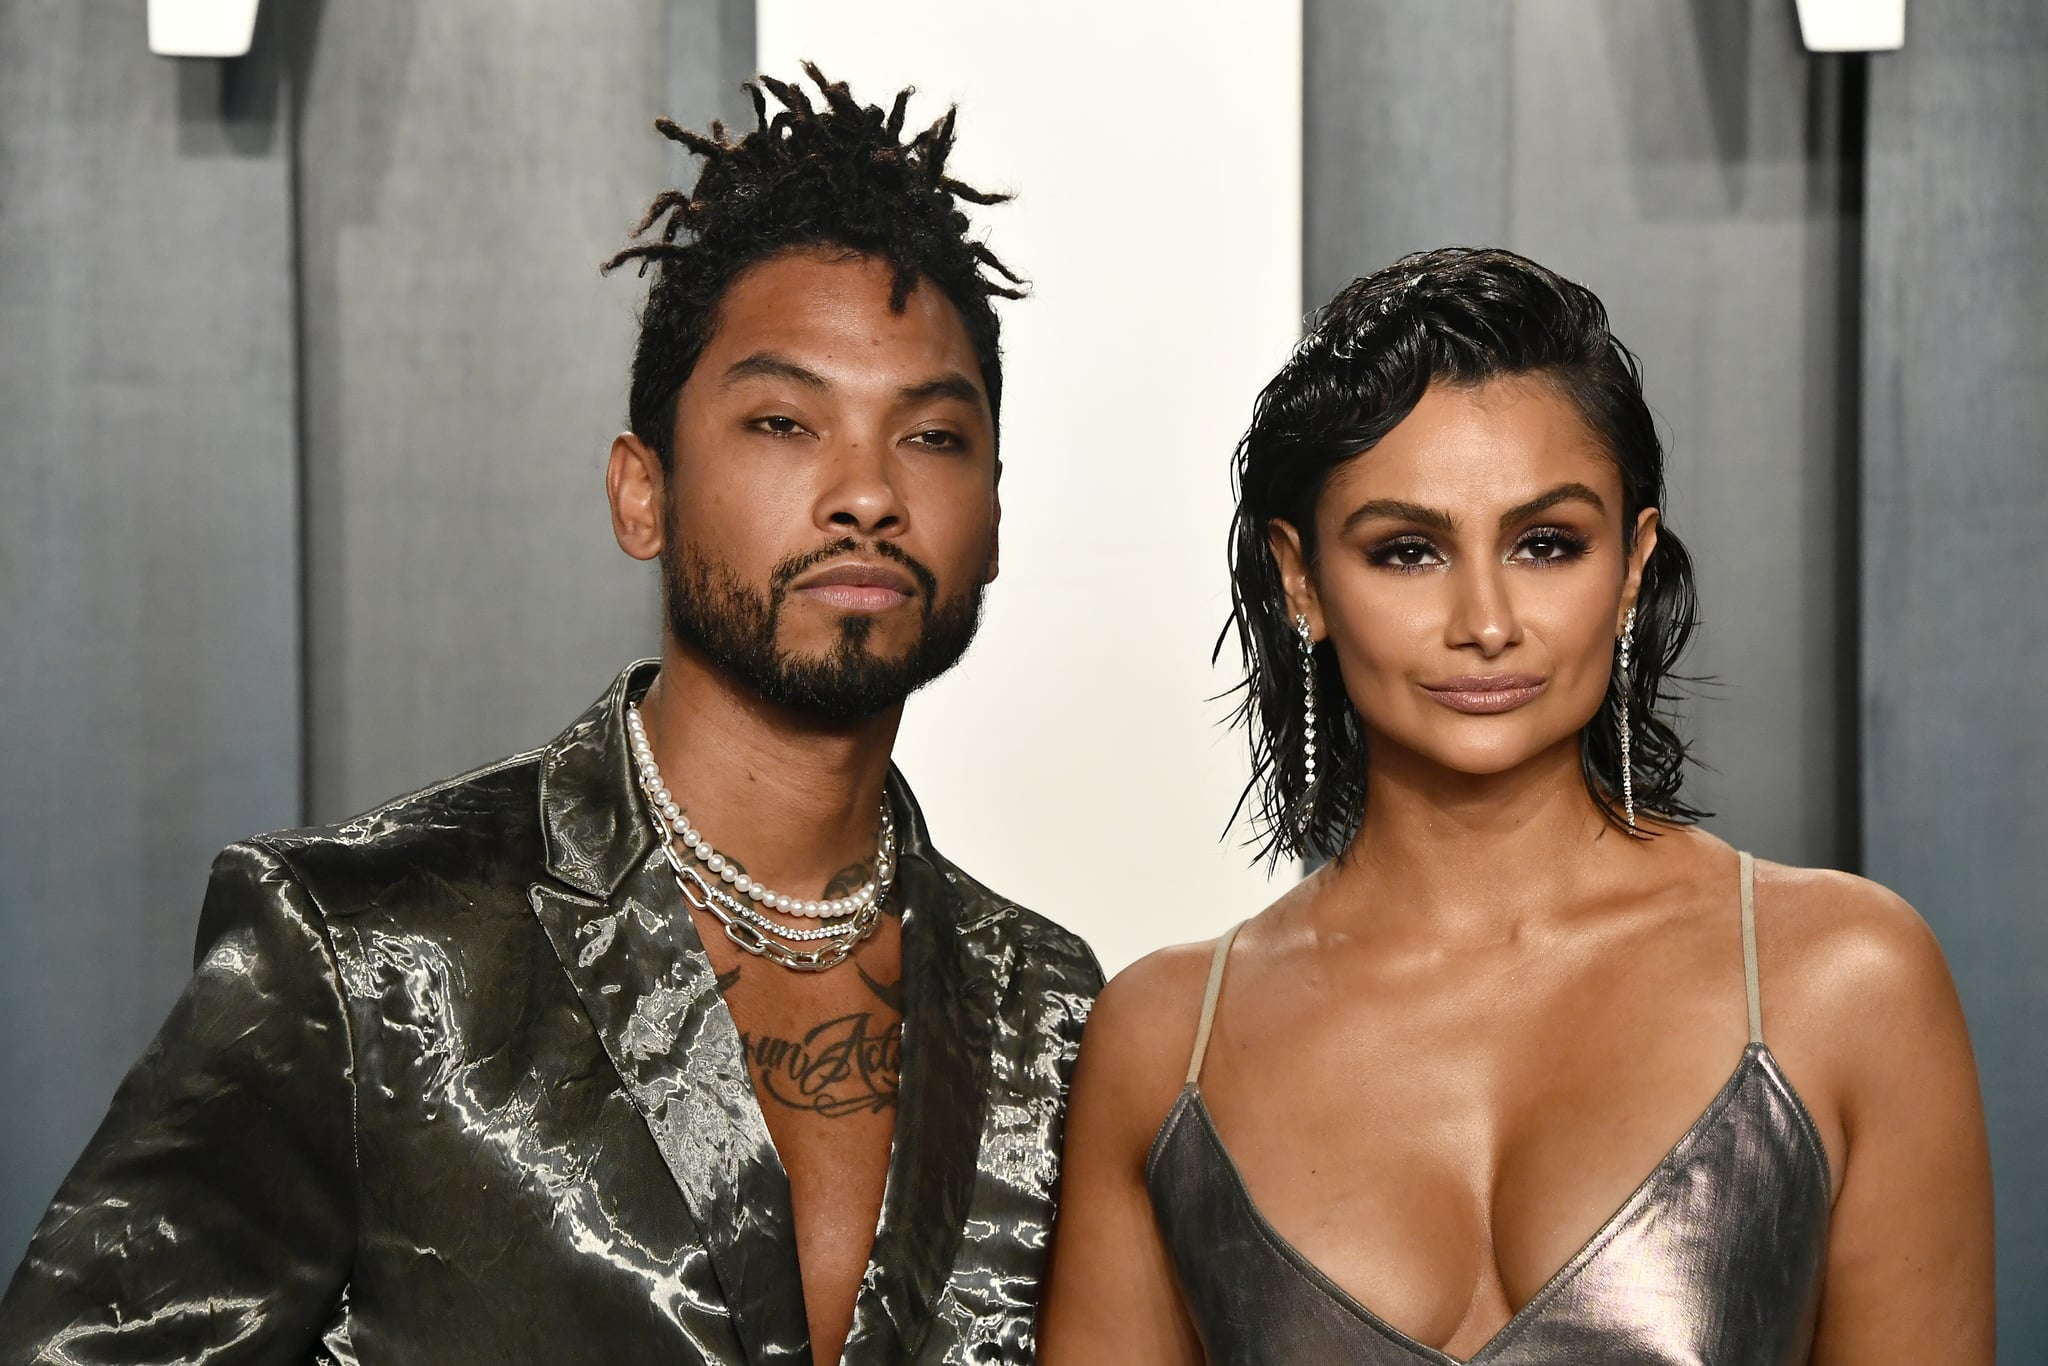 BEVERLY HILLS, CALIFORNIA - FEBRUARY 09: (L-R) Miguel and Nazanin Mandi attend the 2020 Vanity Fair Oscar Party hosted by Radhika Jones at Wallis Annenberg Centre for the Performing Arts on February 09, 2020 in Beverly Hills, California. (Photo by Frazer Harrison/Getty Images)